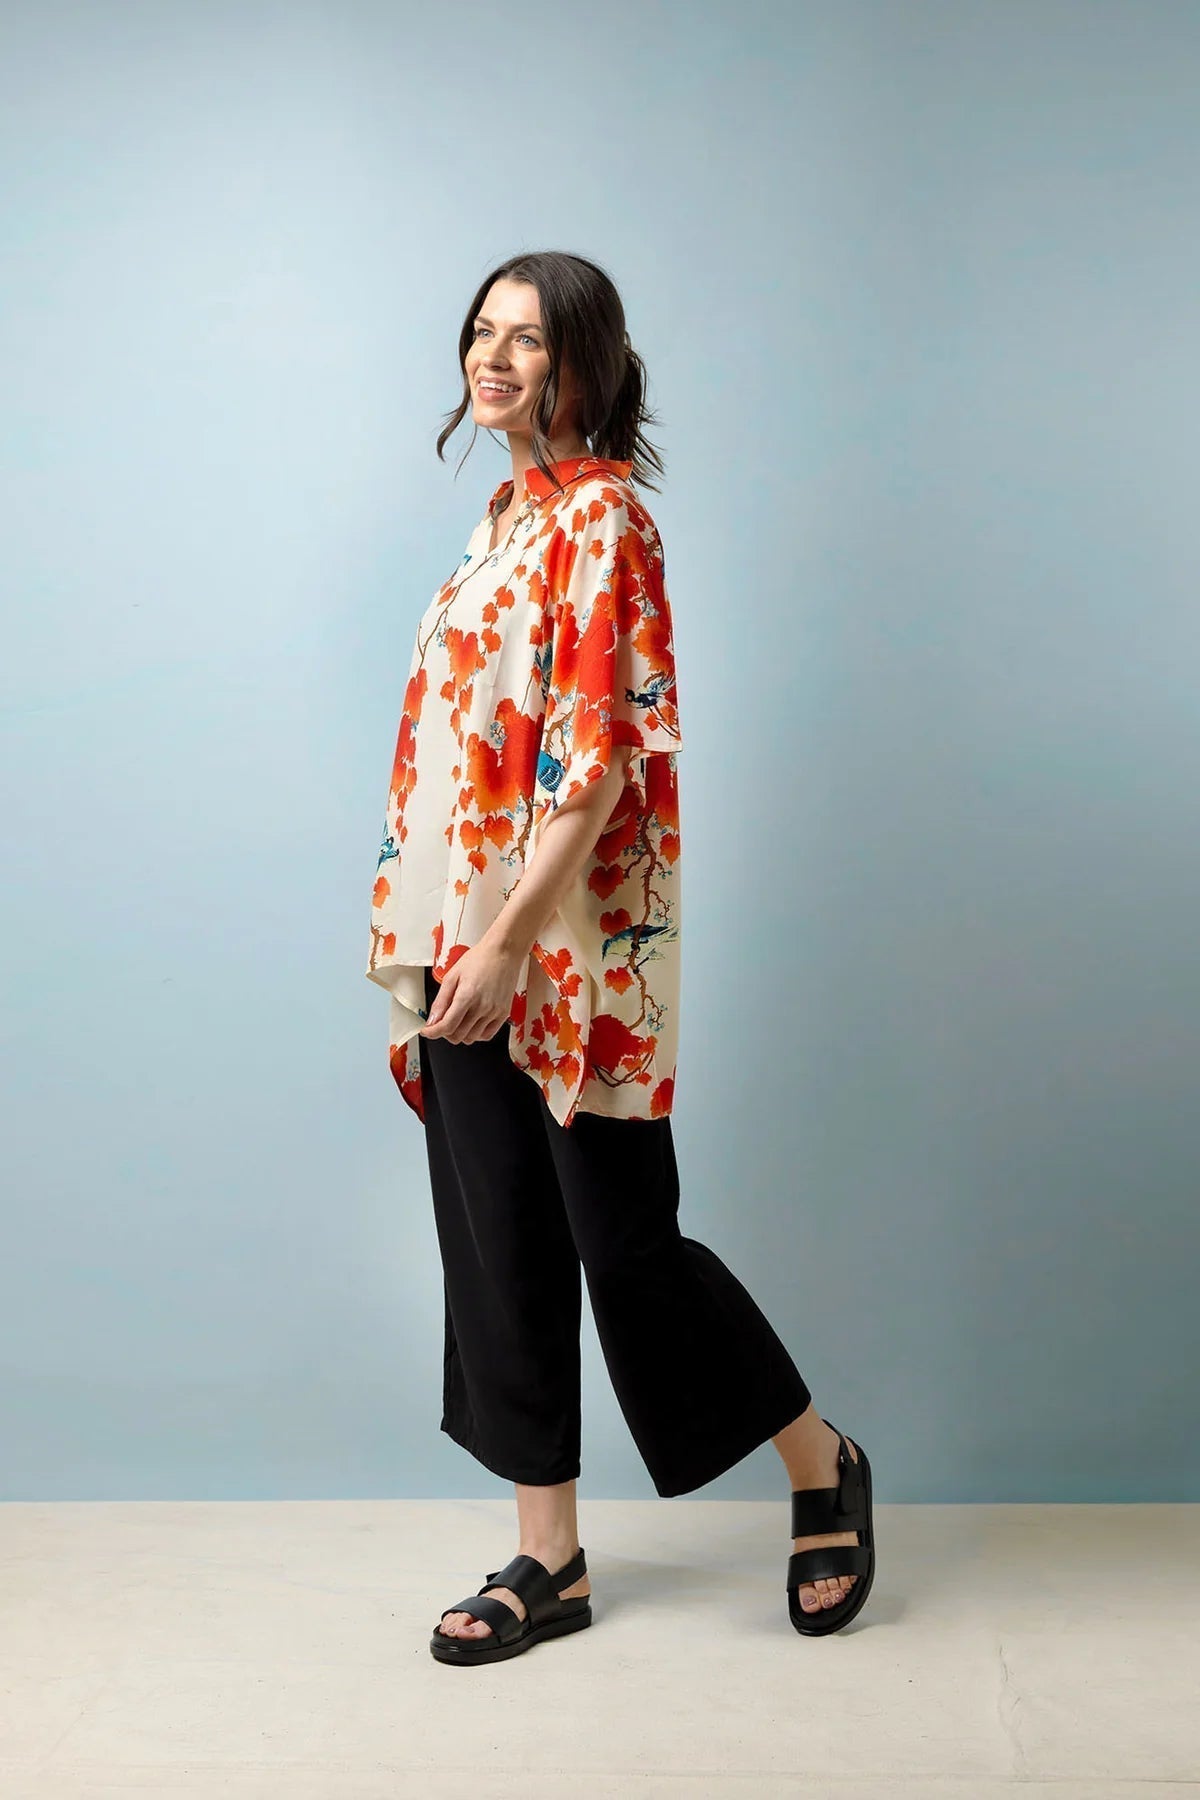 Acer Red Tunic - The Nancy Smillie Shop - Art, Jewellery & Designer Gifts Glasgow